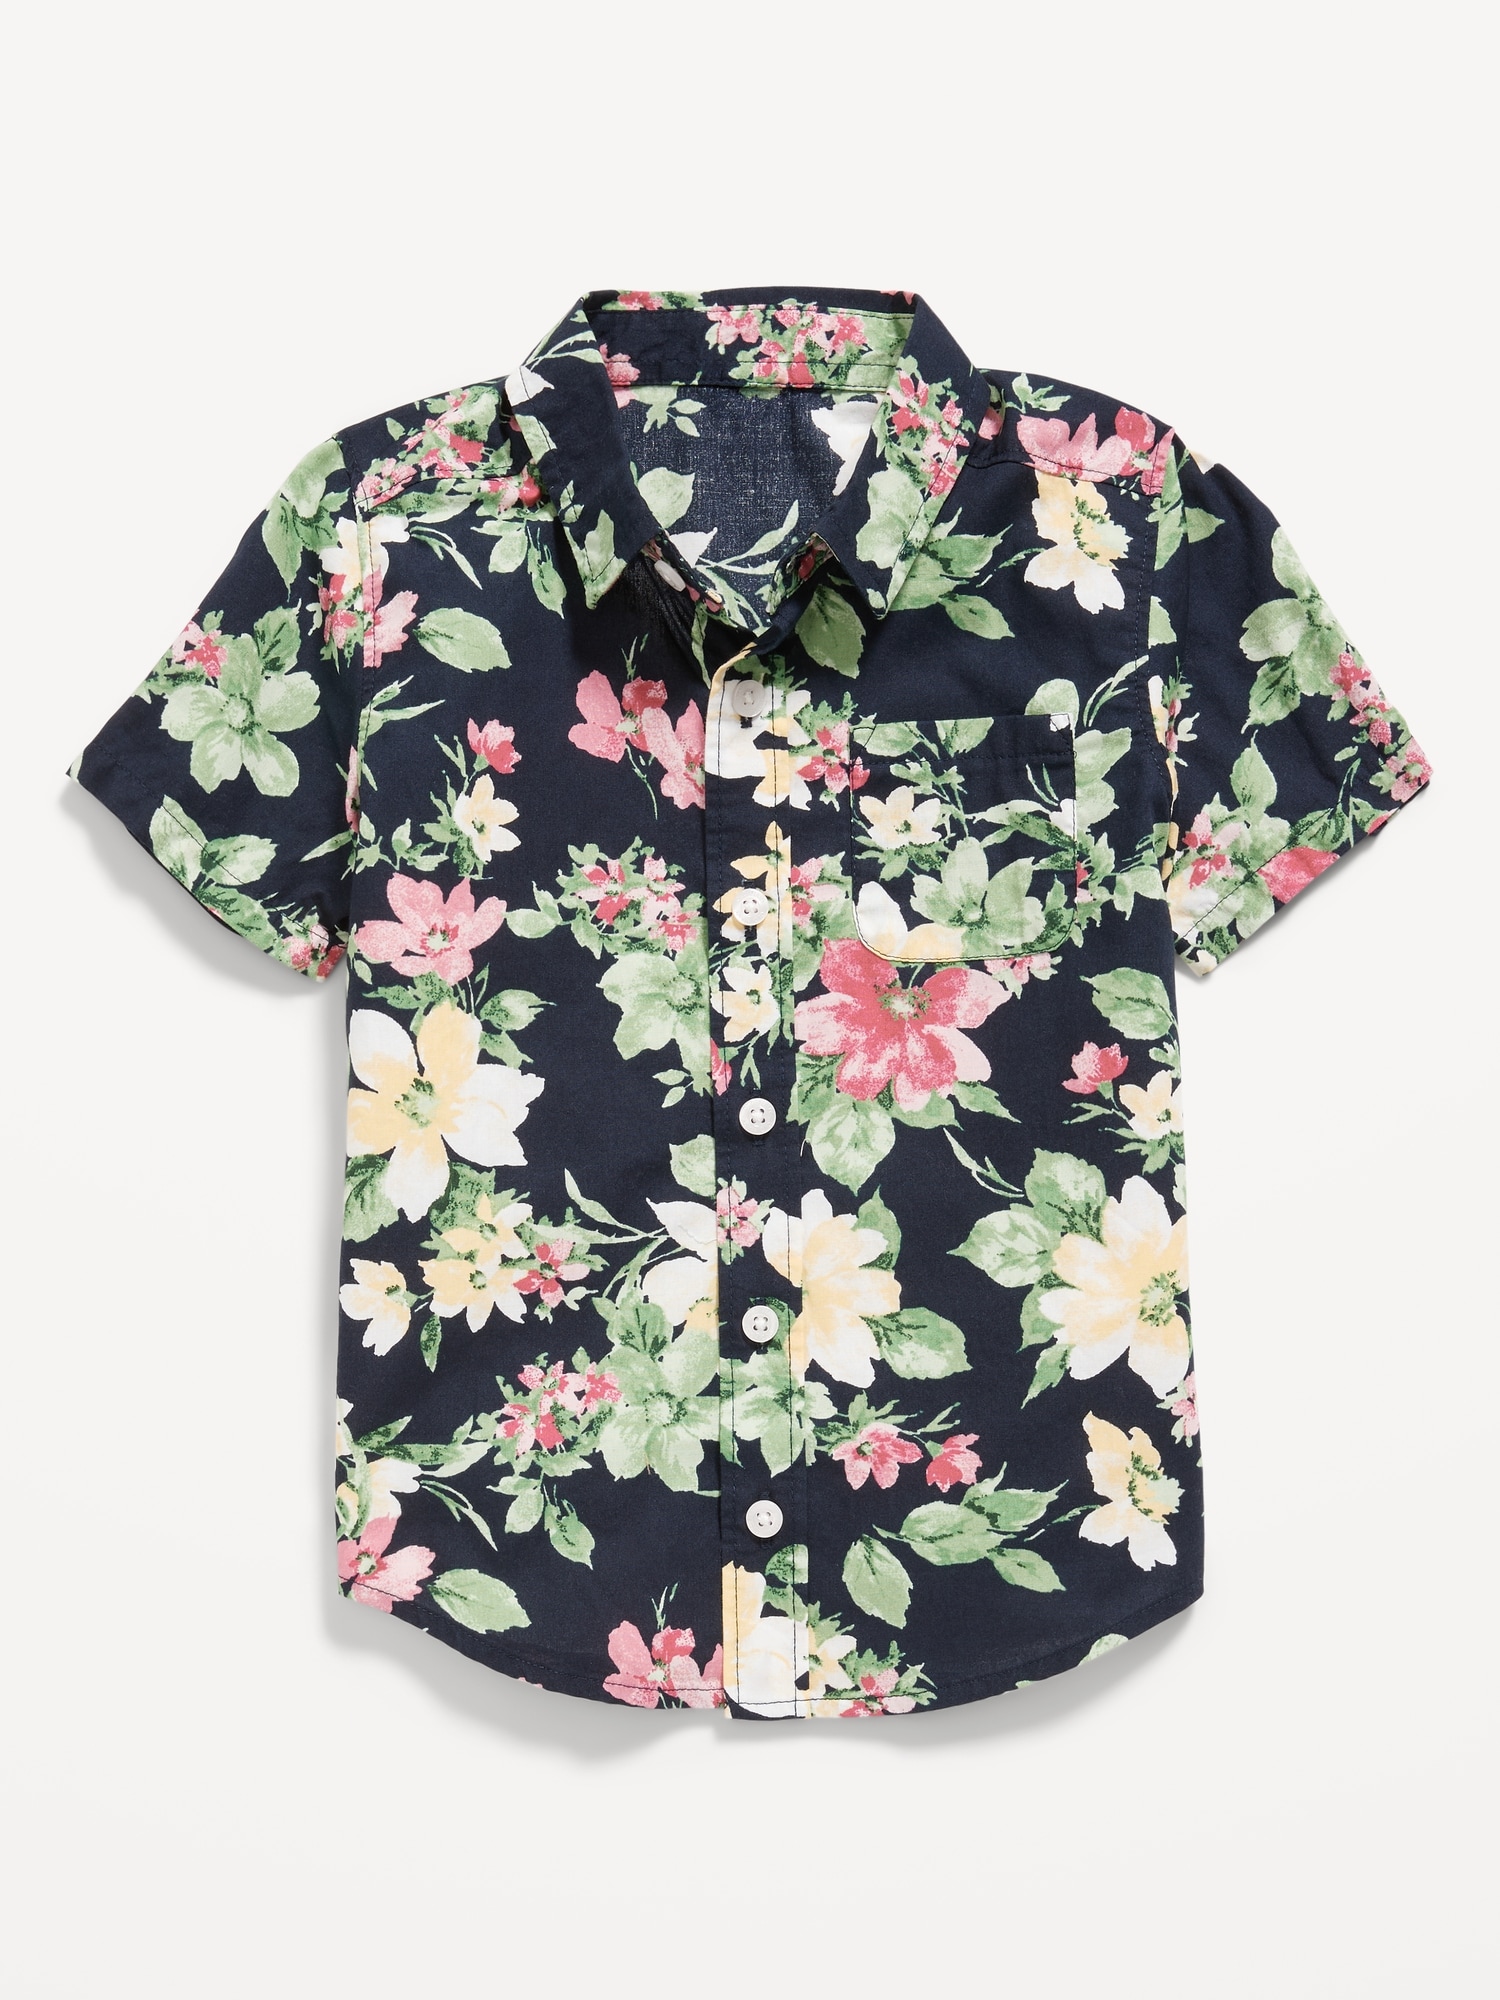 Hawaiian Aloha Print Mens Beach Hawaiian Shirts For Men Oversized Short  Sleeve Camisas For Casual And Beach Occasions With Flower Accents And  Coconut Tree Design 210524 From Lu006, $17.47 | DHgate.Com